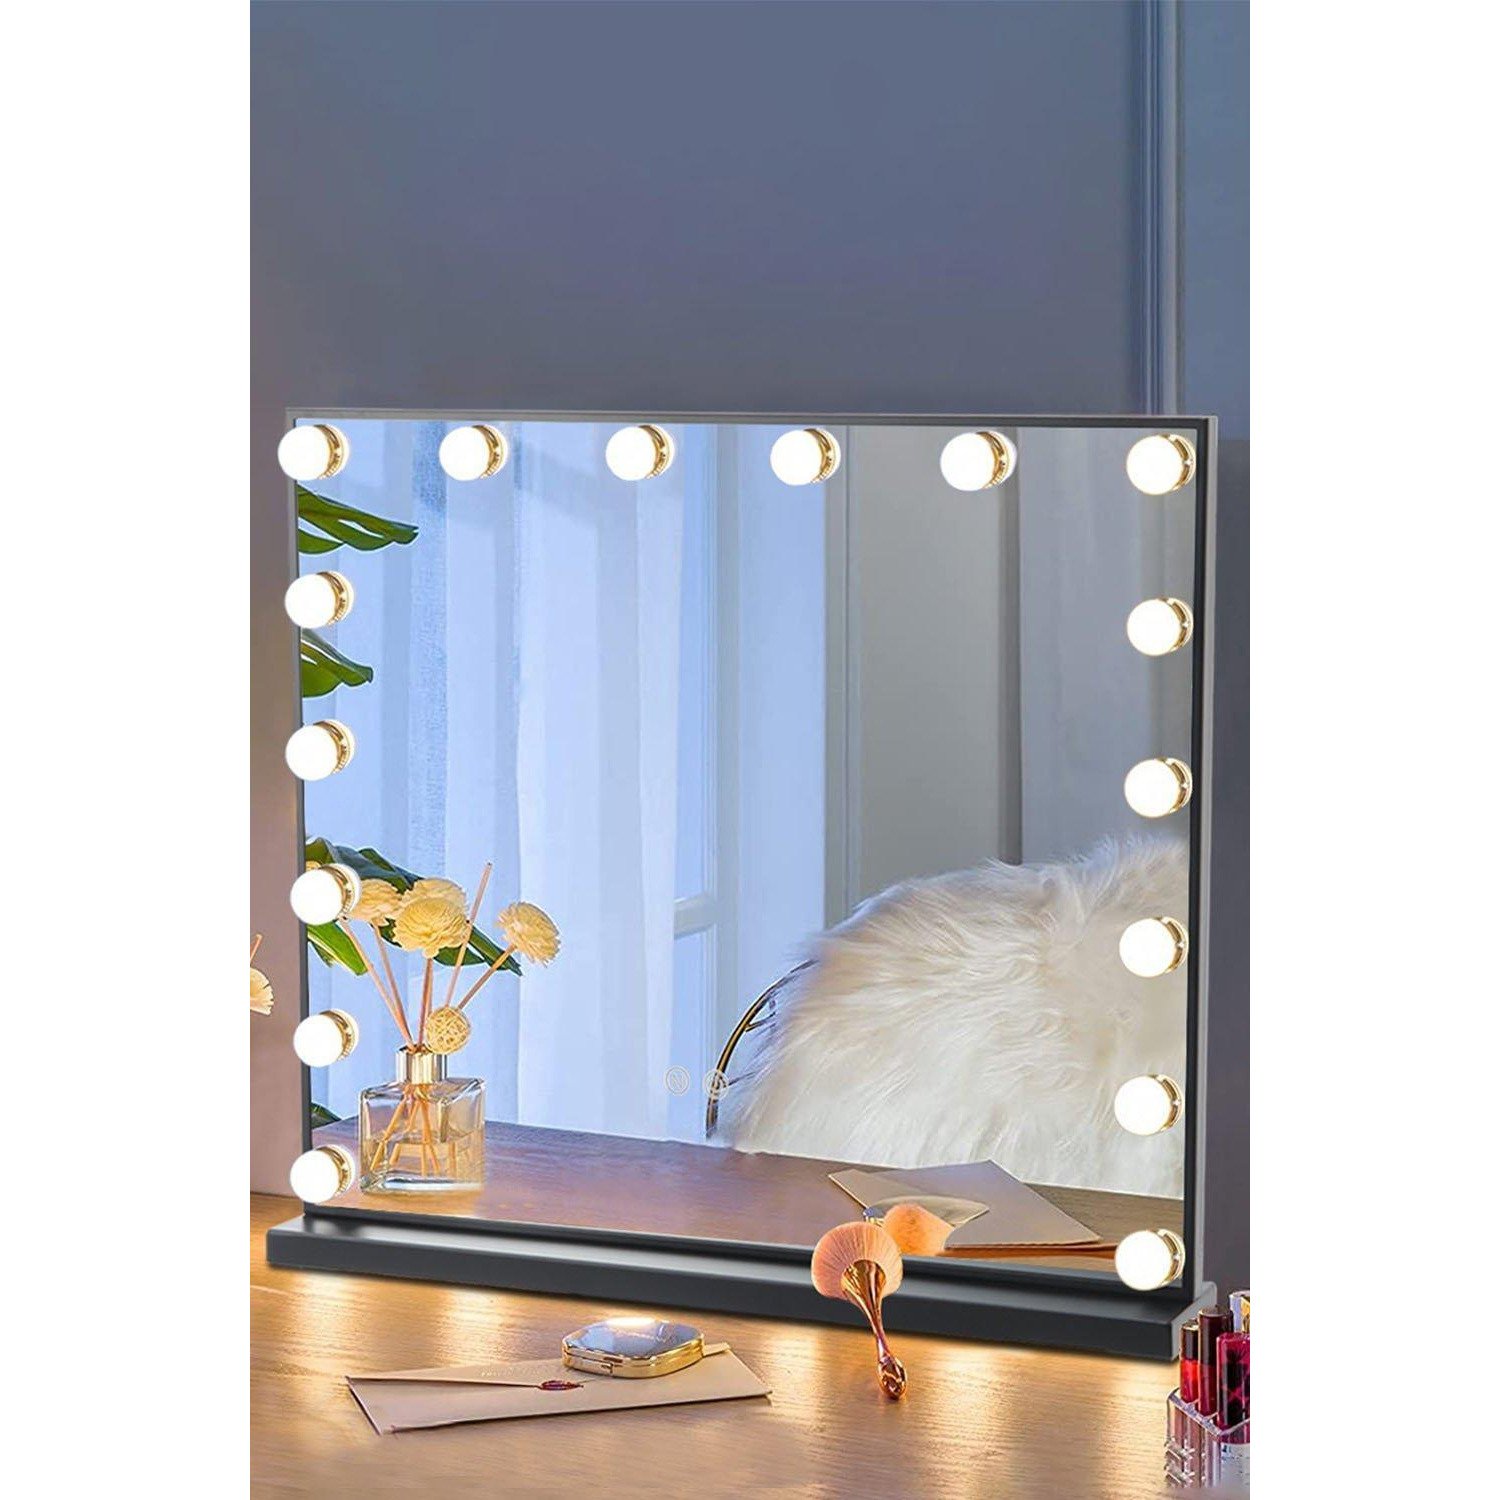 3 Colors Smart Touch Control Large Hollywood Makeup Mirror, 62*52cm - image 1